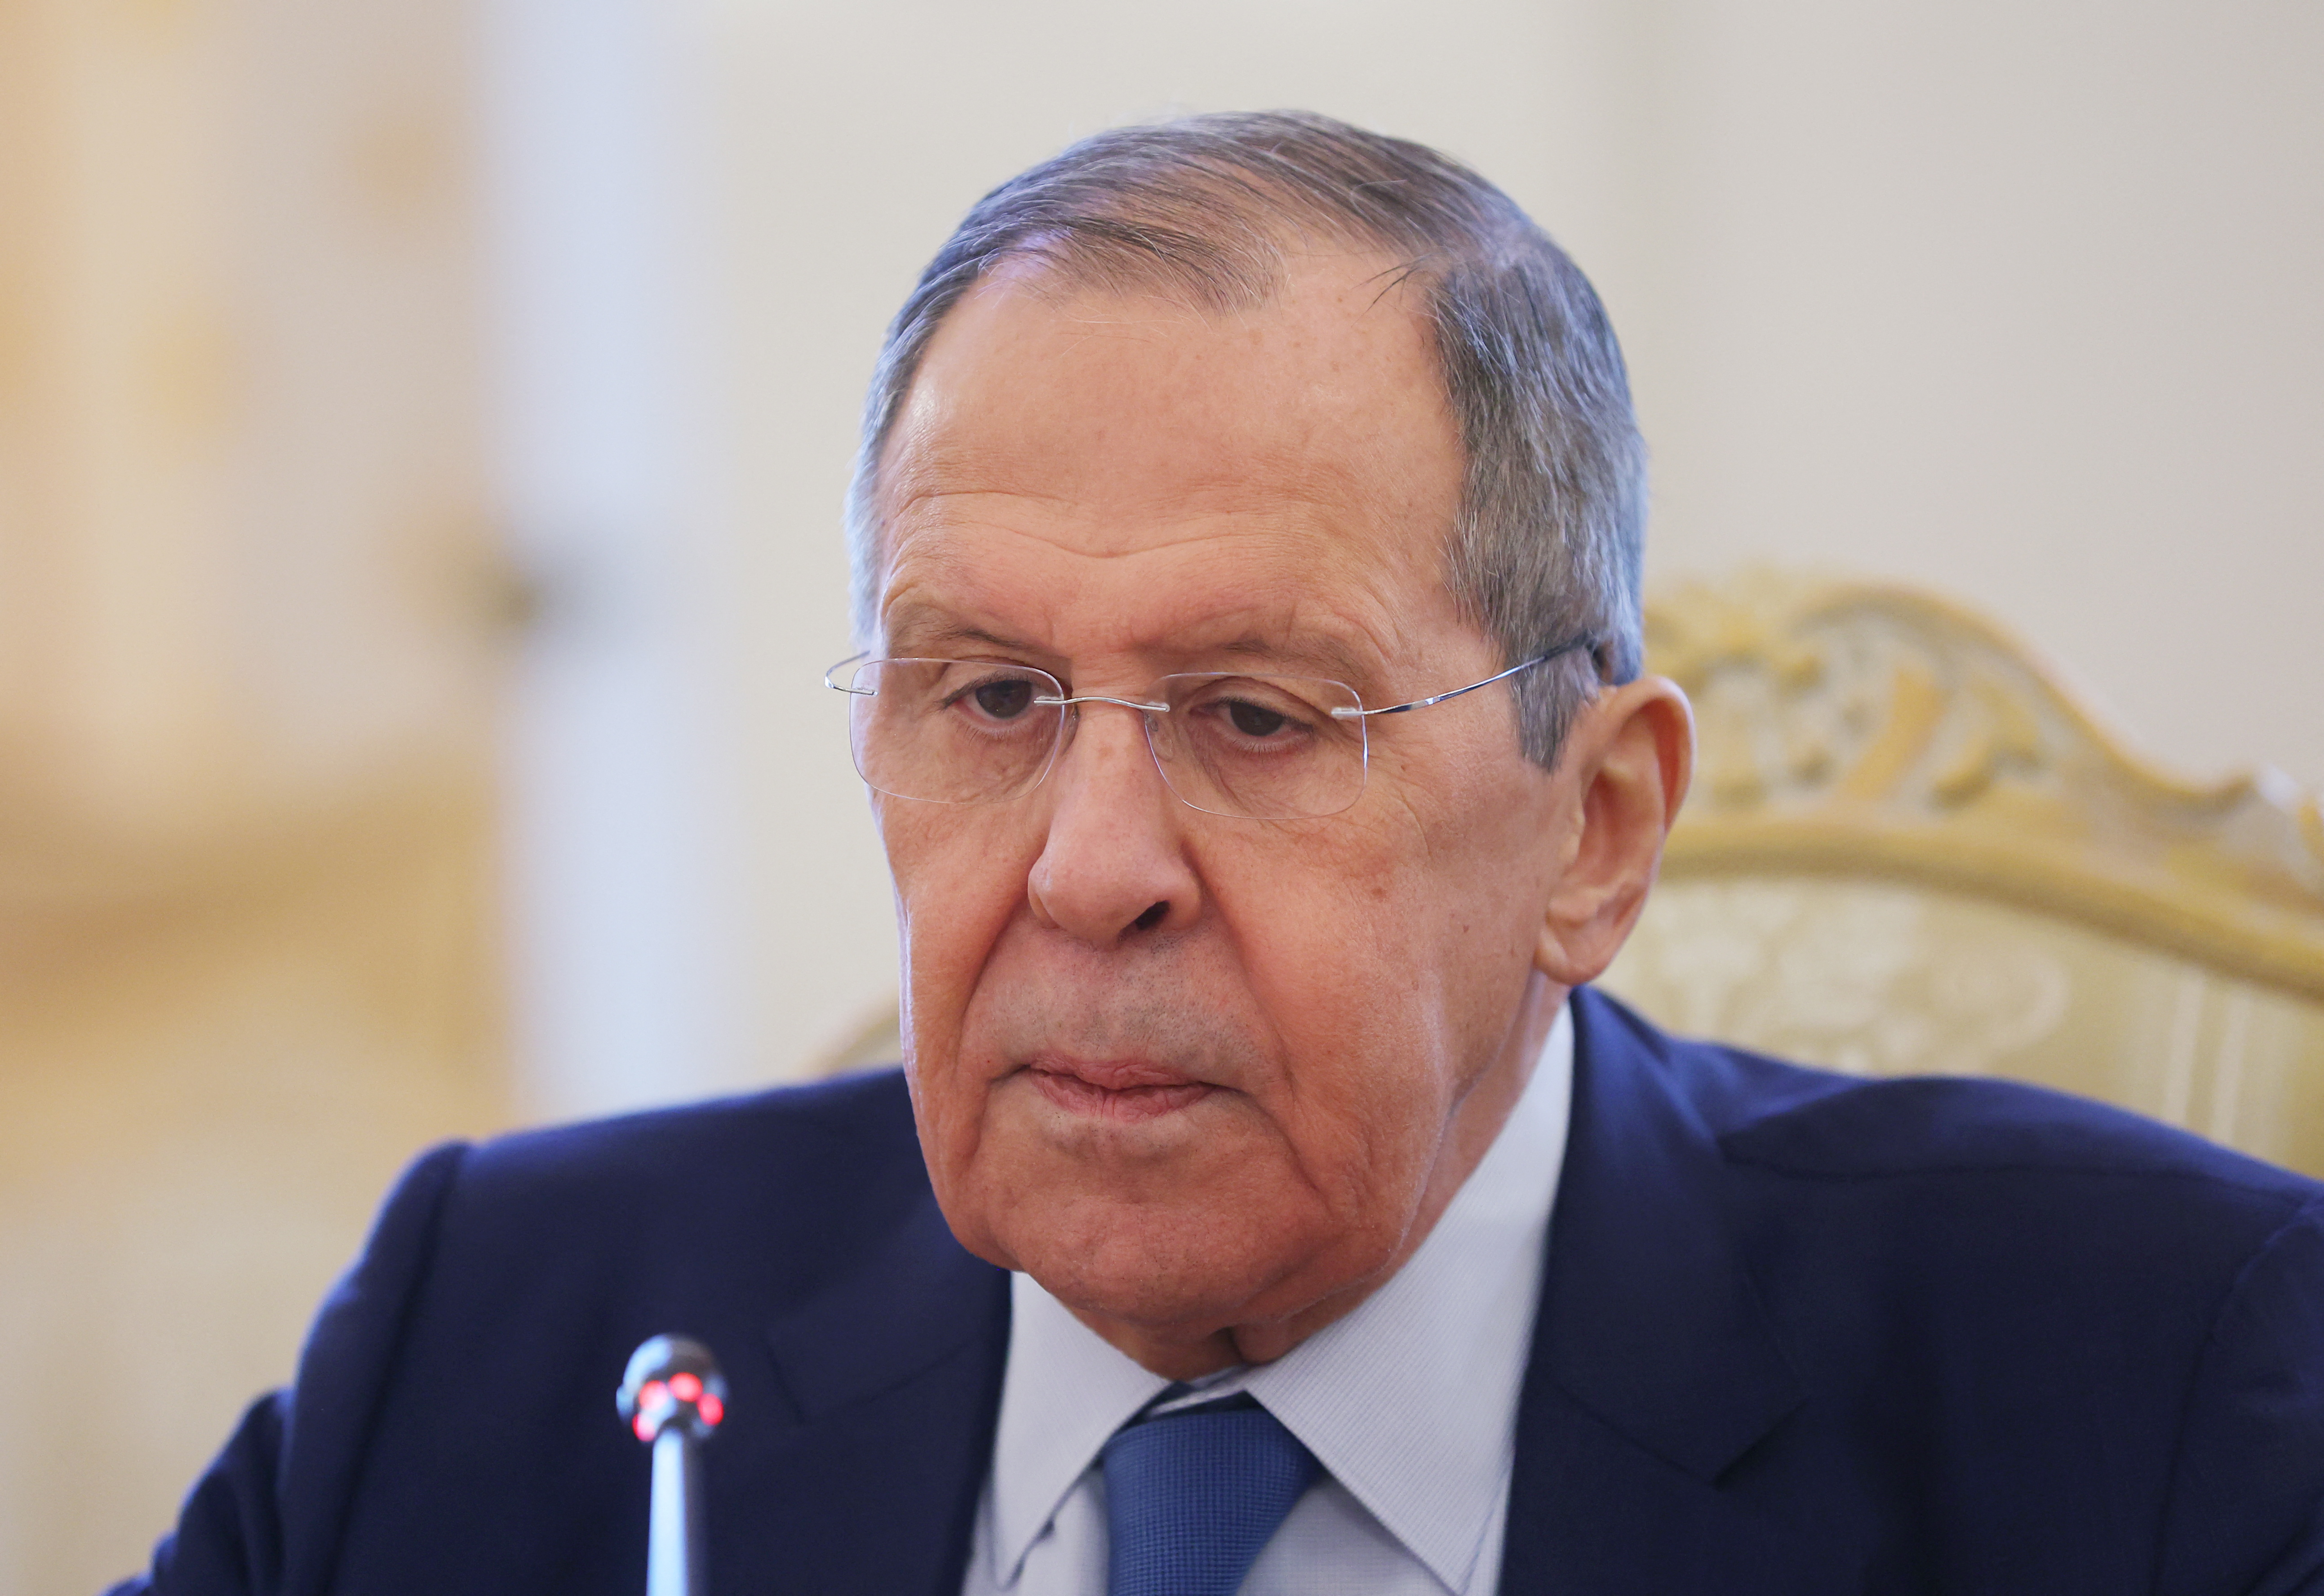 Russian Foreign Minister Sergei Lavrov meets with Qatari Deputy Prime Minister and Minister of Foreign Affairs Sheikh Mohammed bin Abdulrahman Al-Thani in Moscow